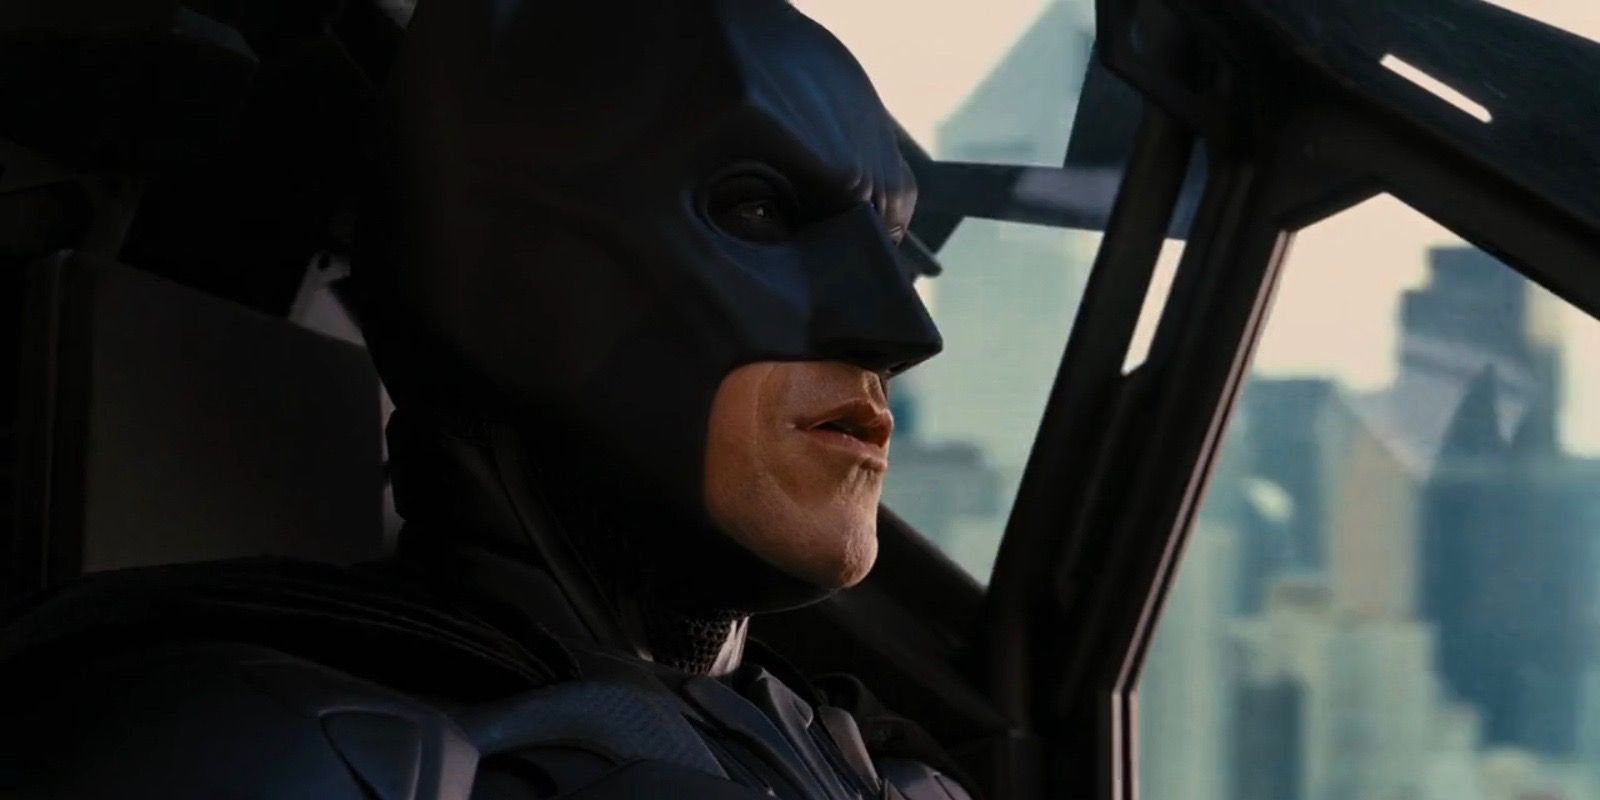 Batman looking out in his Batmobile in the The Dark Knight Rises final act